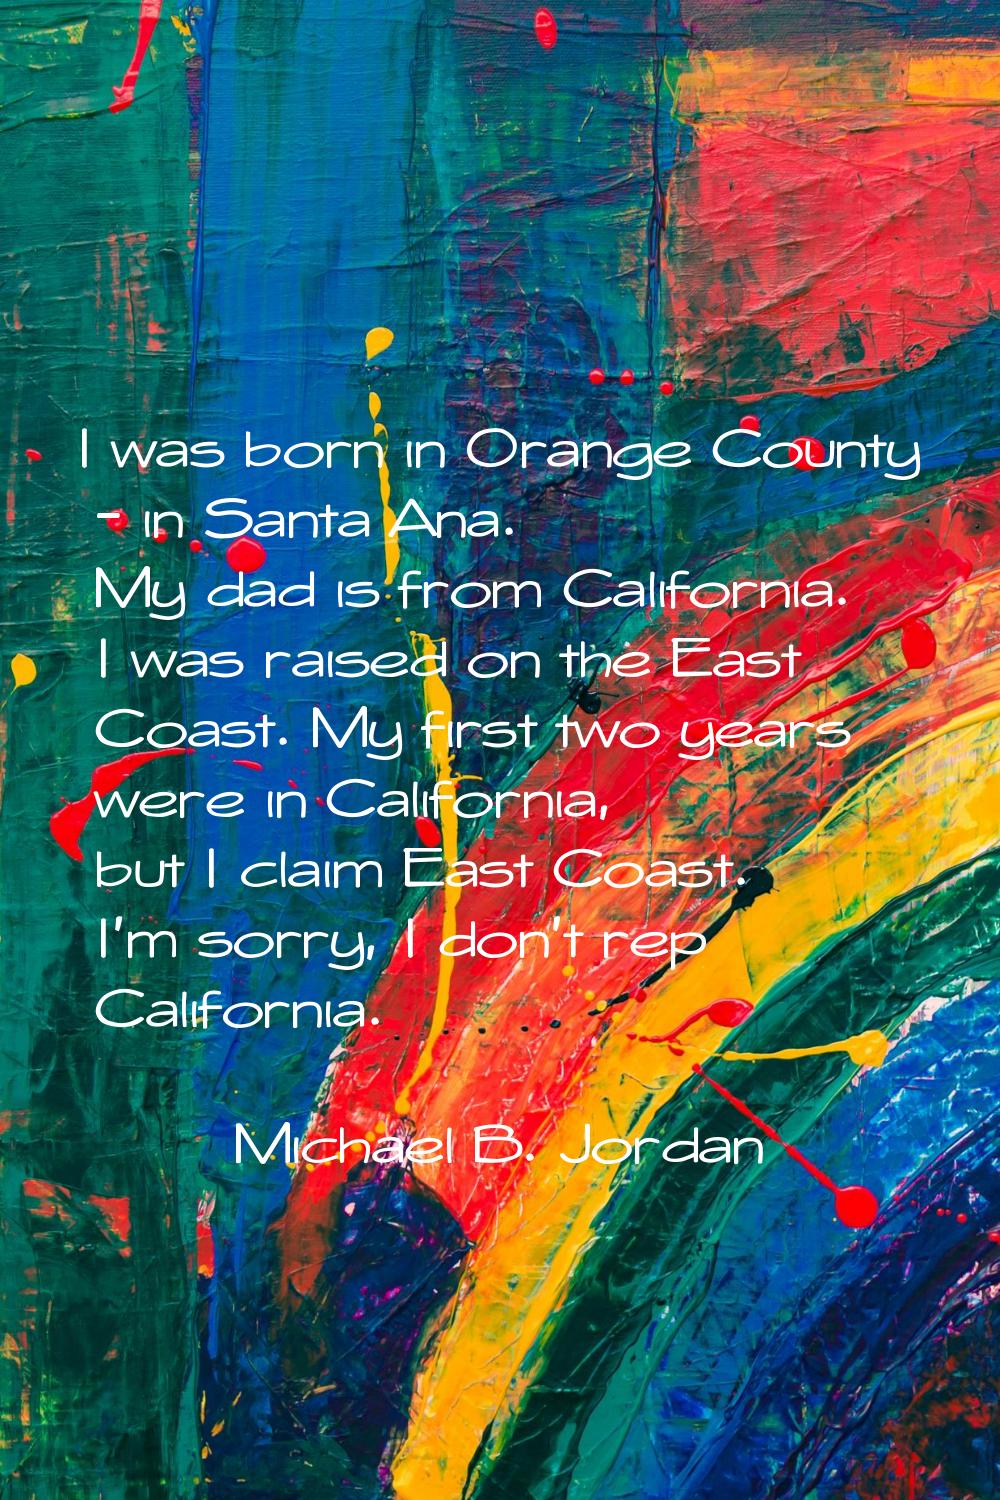 I was born in Orange County - in Santa Ana. My dad is from California. I was raised on the East Coa